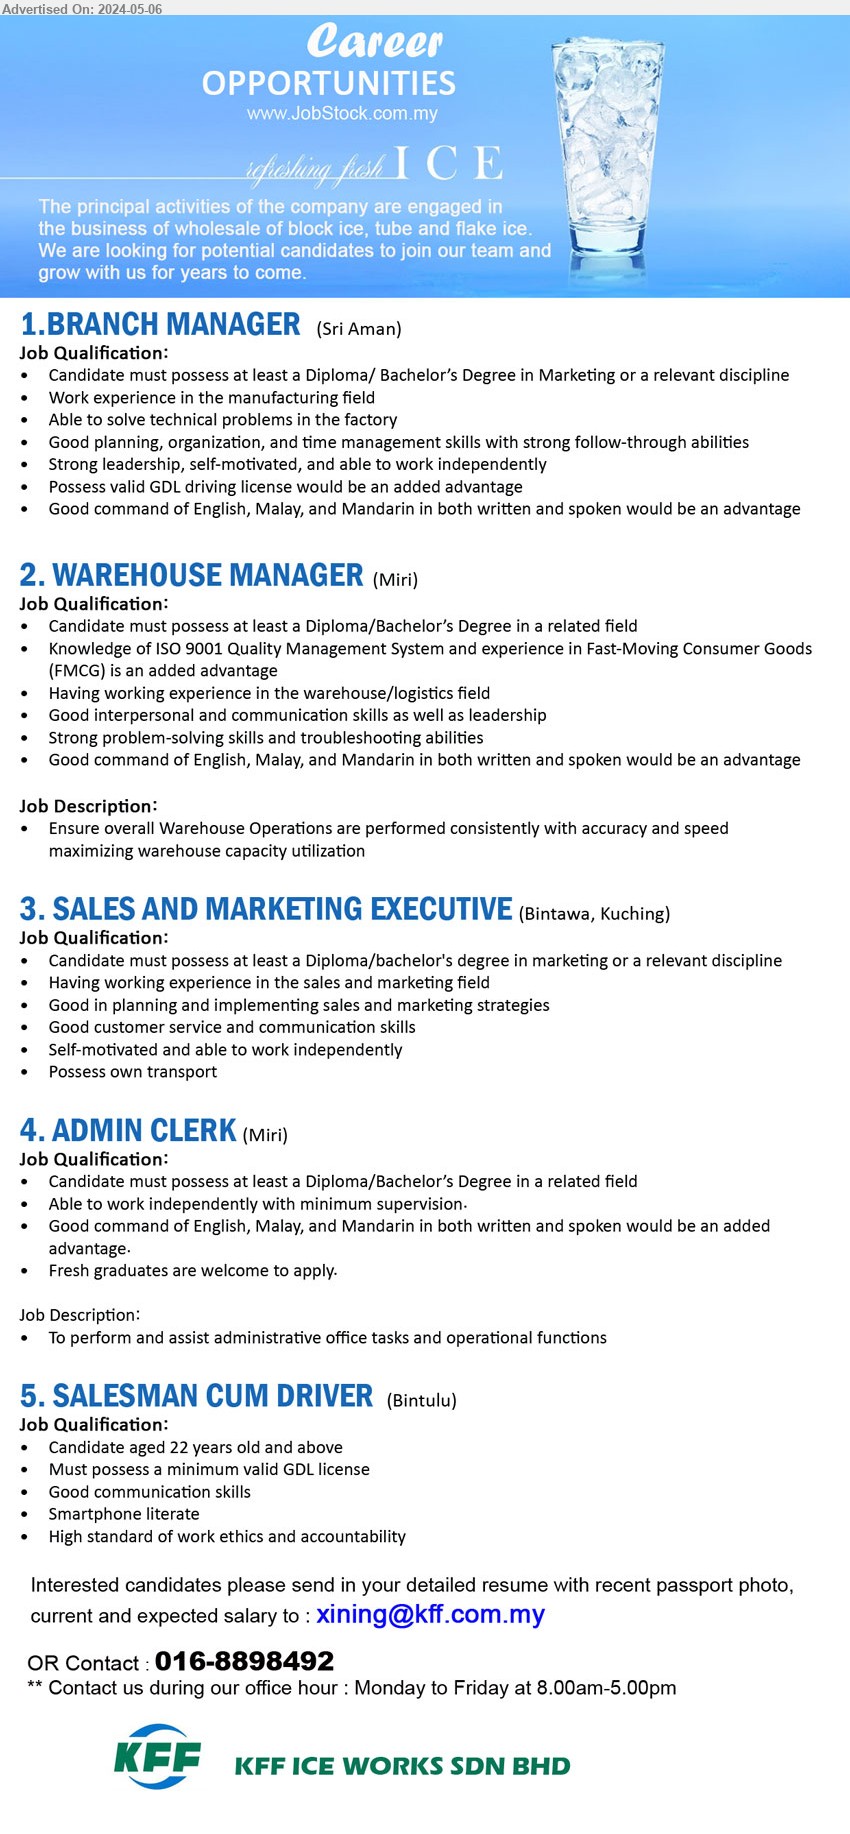 KFF ICE WORKS SDN BHD - 1.BRANCH MANAGER (Sri Aman),  Diploma/ Bachelor’s Degree in Marketing, Work experience in the manufacturing field ,...
2. WAREHOUSE MANAGER (Miri), Diploma/Bachelor’s Degree, Knowledge of ISO 9001 Quality Management System and experience in Fast-Moving Consumer Goods (FMCG) ...
3. SALES AND MARKETING EXECUTIVE (Kuching), Diploma/bachelor's degree in marketing, Having working experience in the sales and marketing field,...
4. ADMIN CLERK (Miri), Diploma, Bachelor Degree, To perform and assist administrative office tasks and operational functions ,...
5. SALESMAN CUM DRIVER (Bintulu), Candidate aged 22 years old and above, Must possess a minimum valid GDL license ,...
Contact : 016-8898492 / Email resume to ....